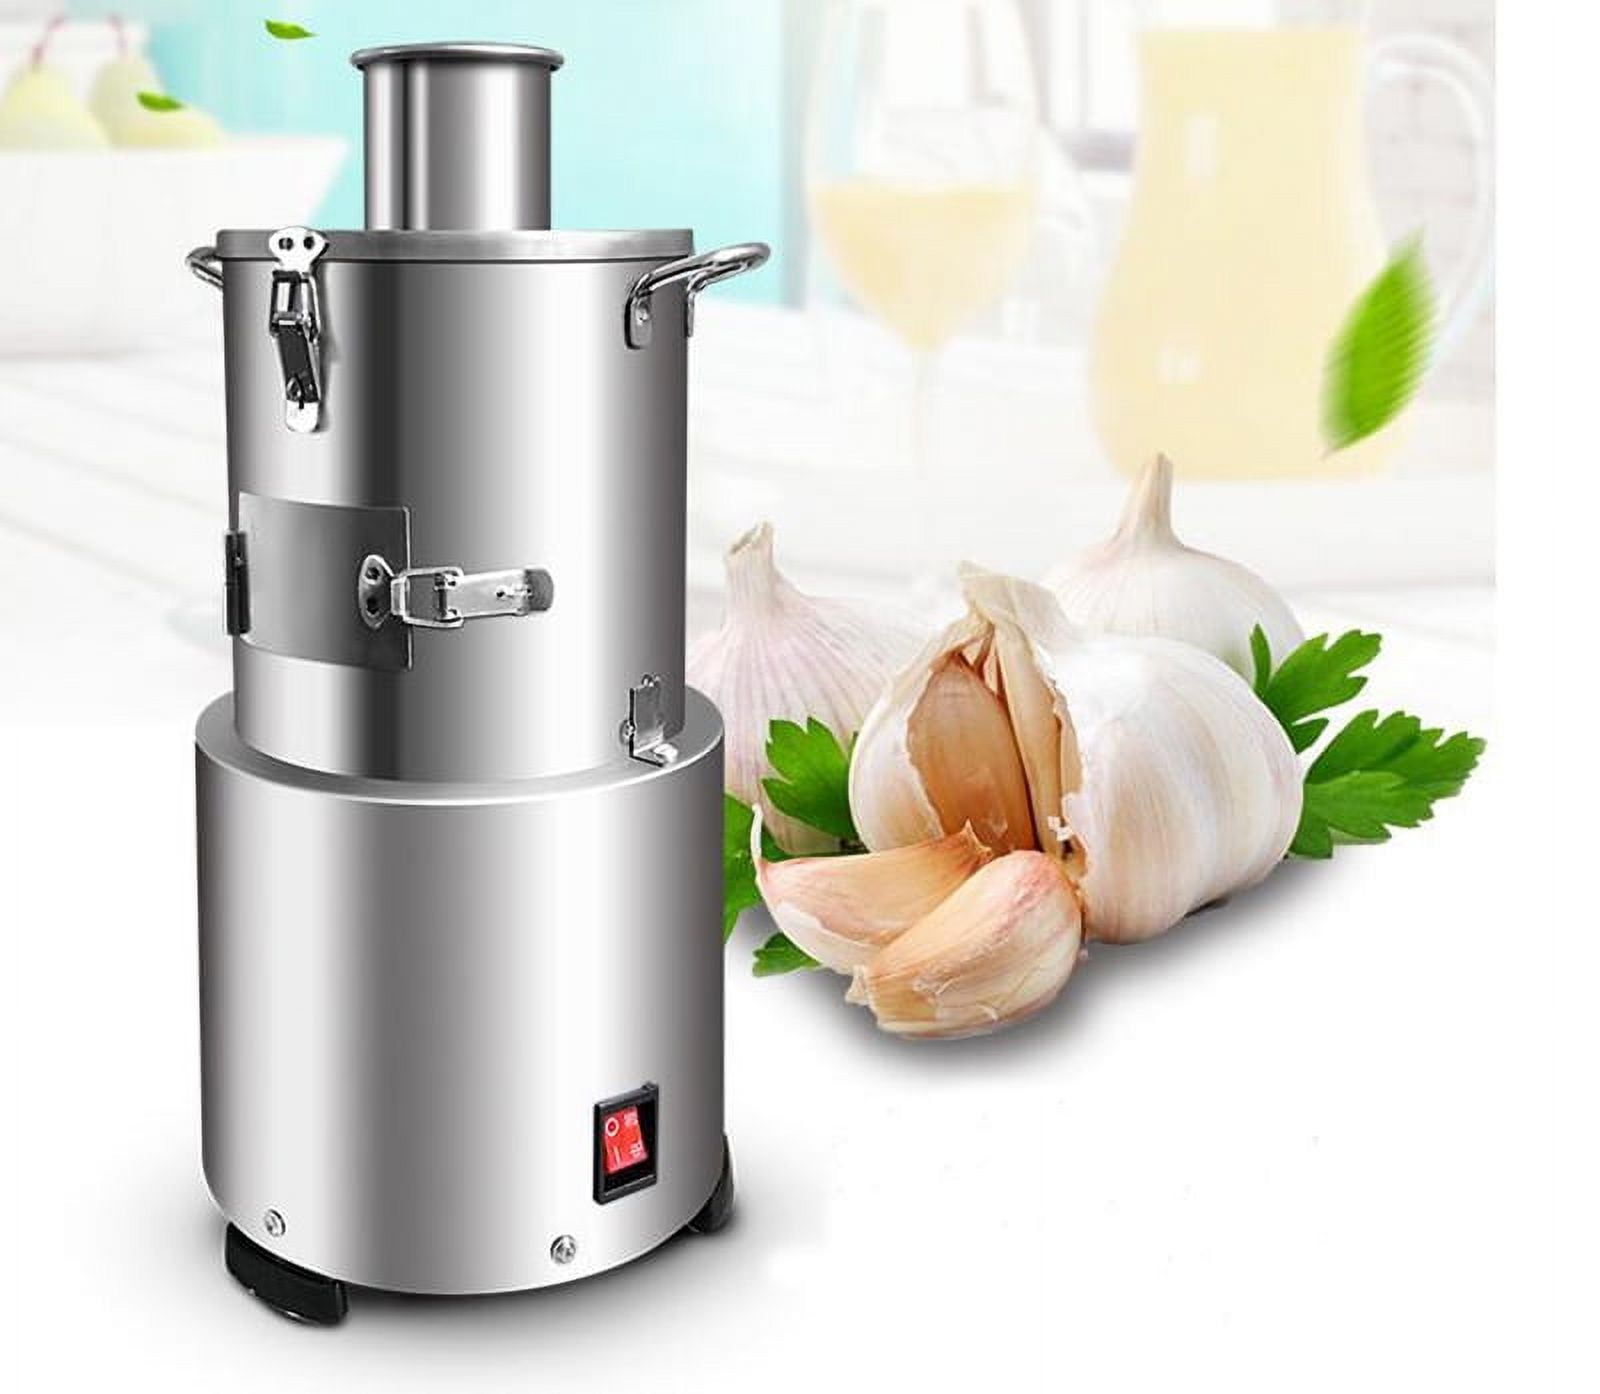 HPDONM 180W Electric Garlic Separator Commercial Garlic Peeling Machine  Garlic Peeler Machine 25kg/h Stainless Steel Garlic Peeler for Home and